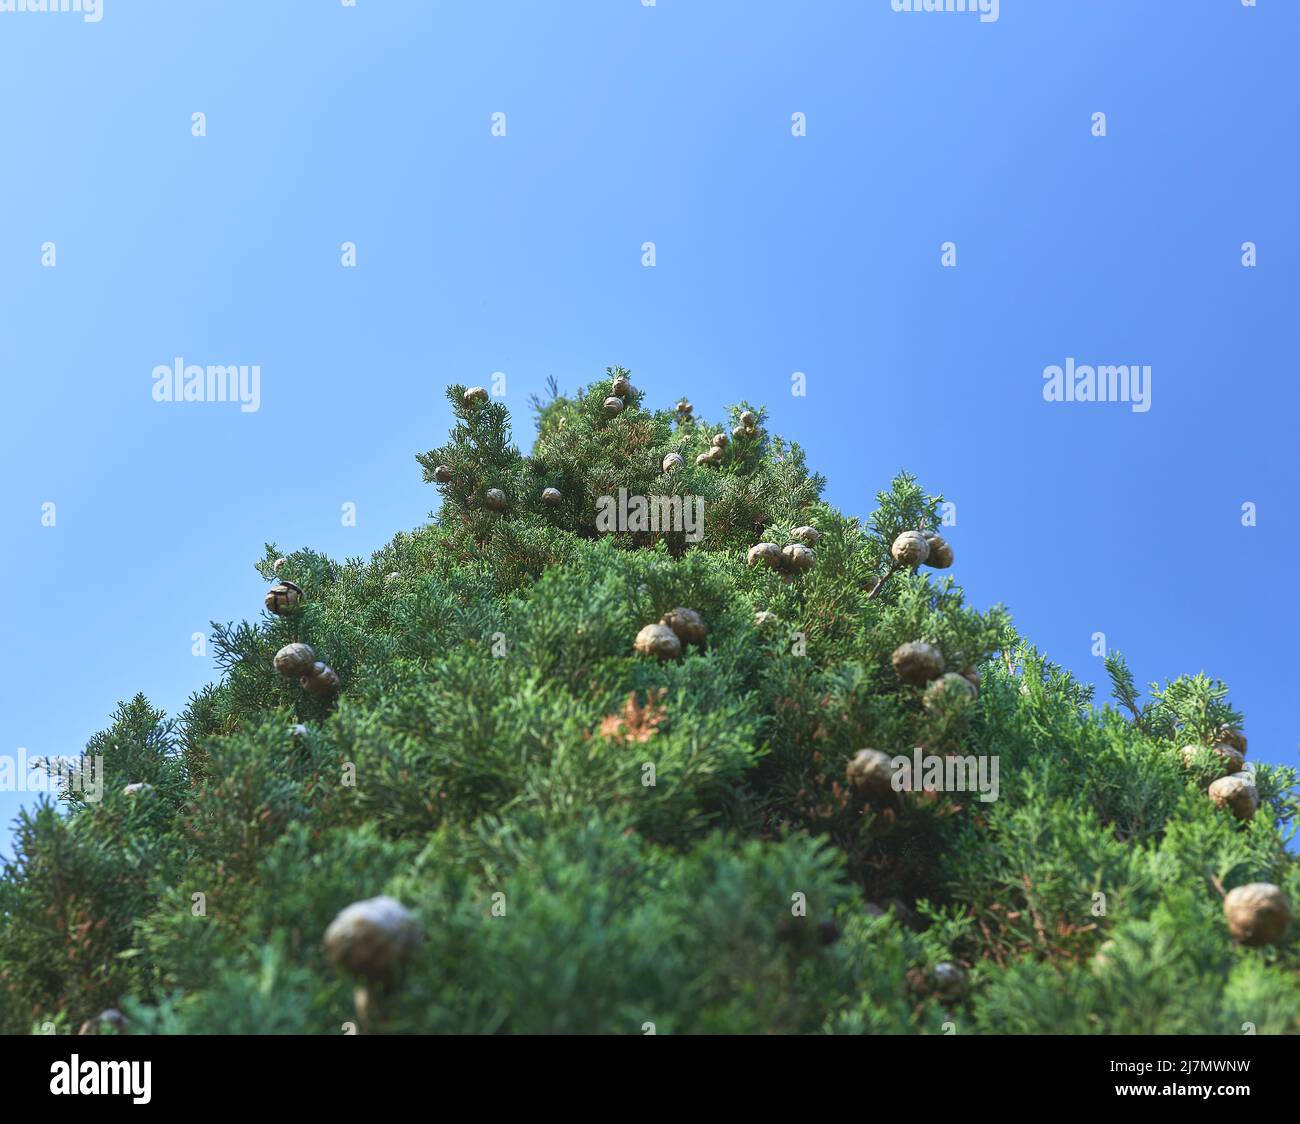 detail of a lower view of a cypress tree with pine cones on a blue background Stock Photo